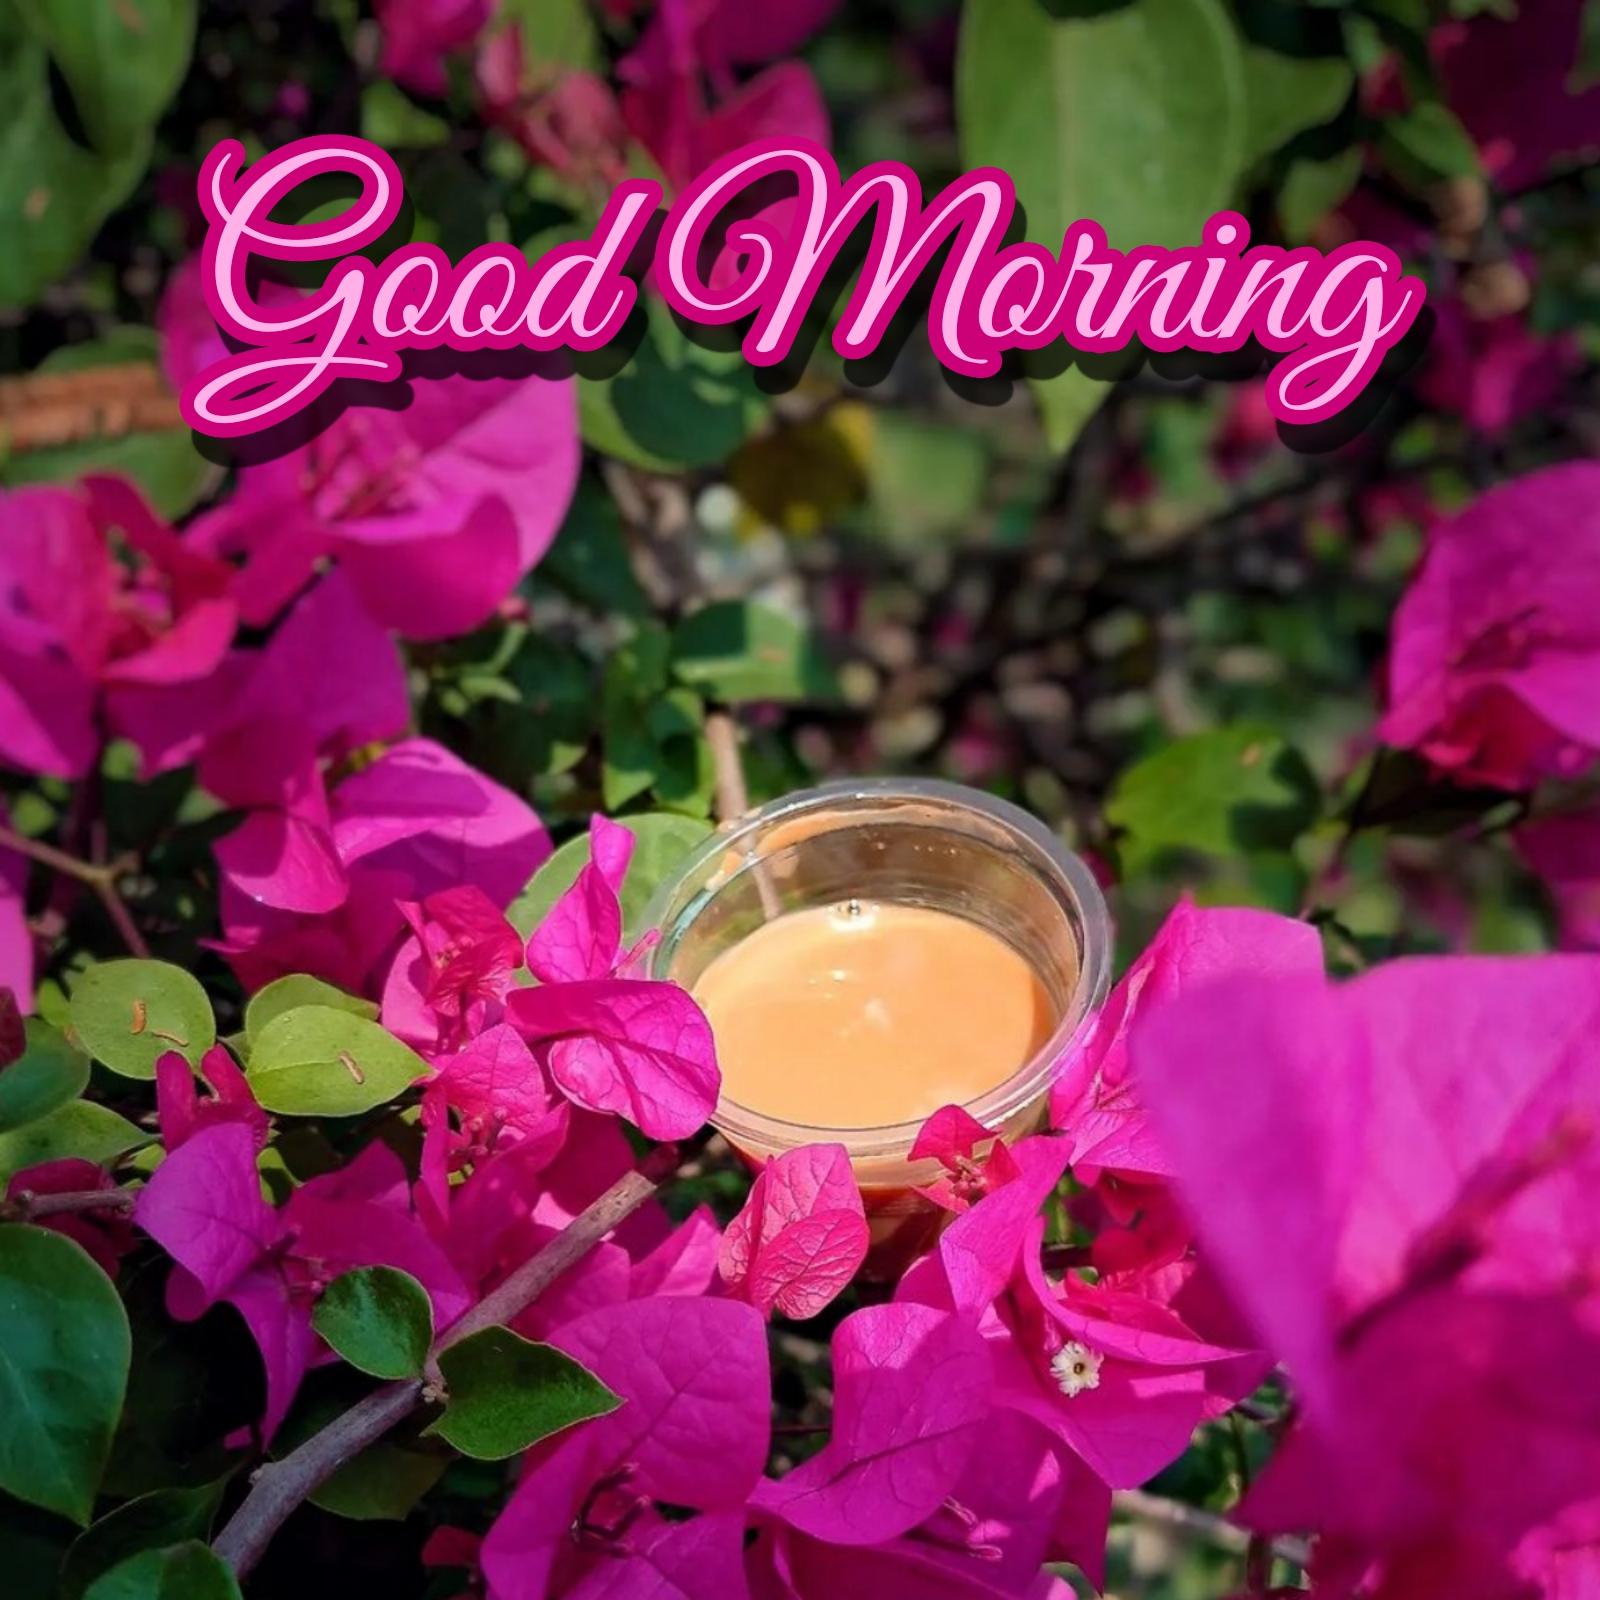 Good Morning Images With Tea And Flowers